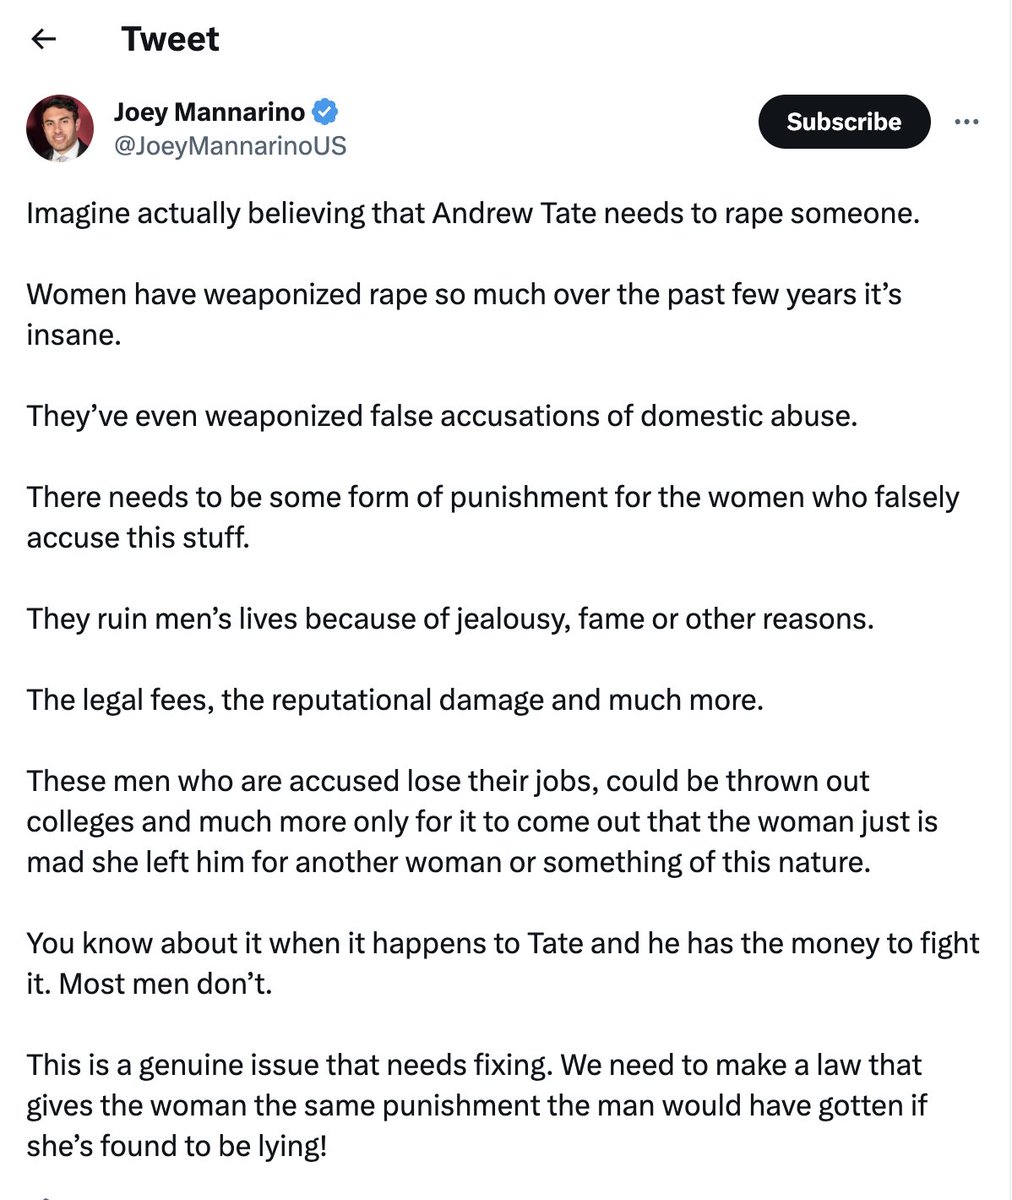 It pisses us off that right-wing pols like THIS FUCKING GUY would rather support an admitted sexual predator than the women he abused & raped. As if anyone rapes because they NEED to. Actually, no one needs to rape and this whole mentality is sickening.